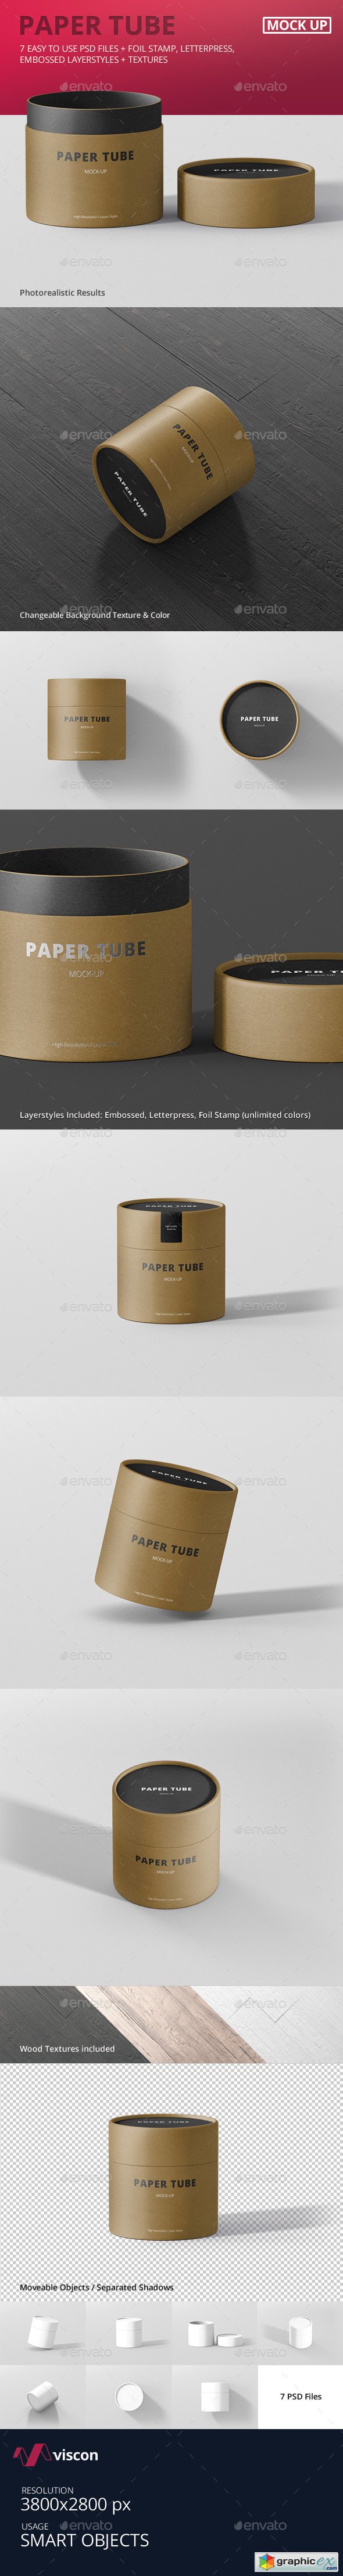 Paper Tube Packaging Mock-Up - Small